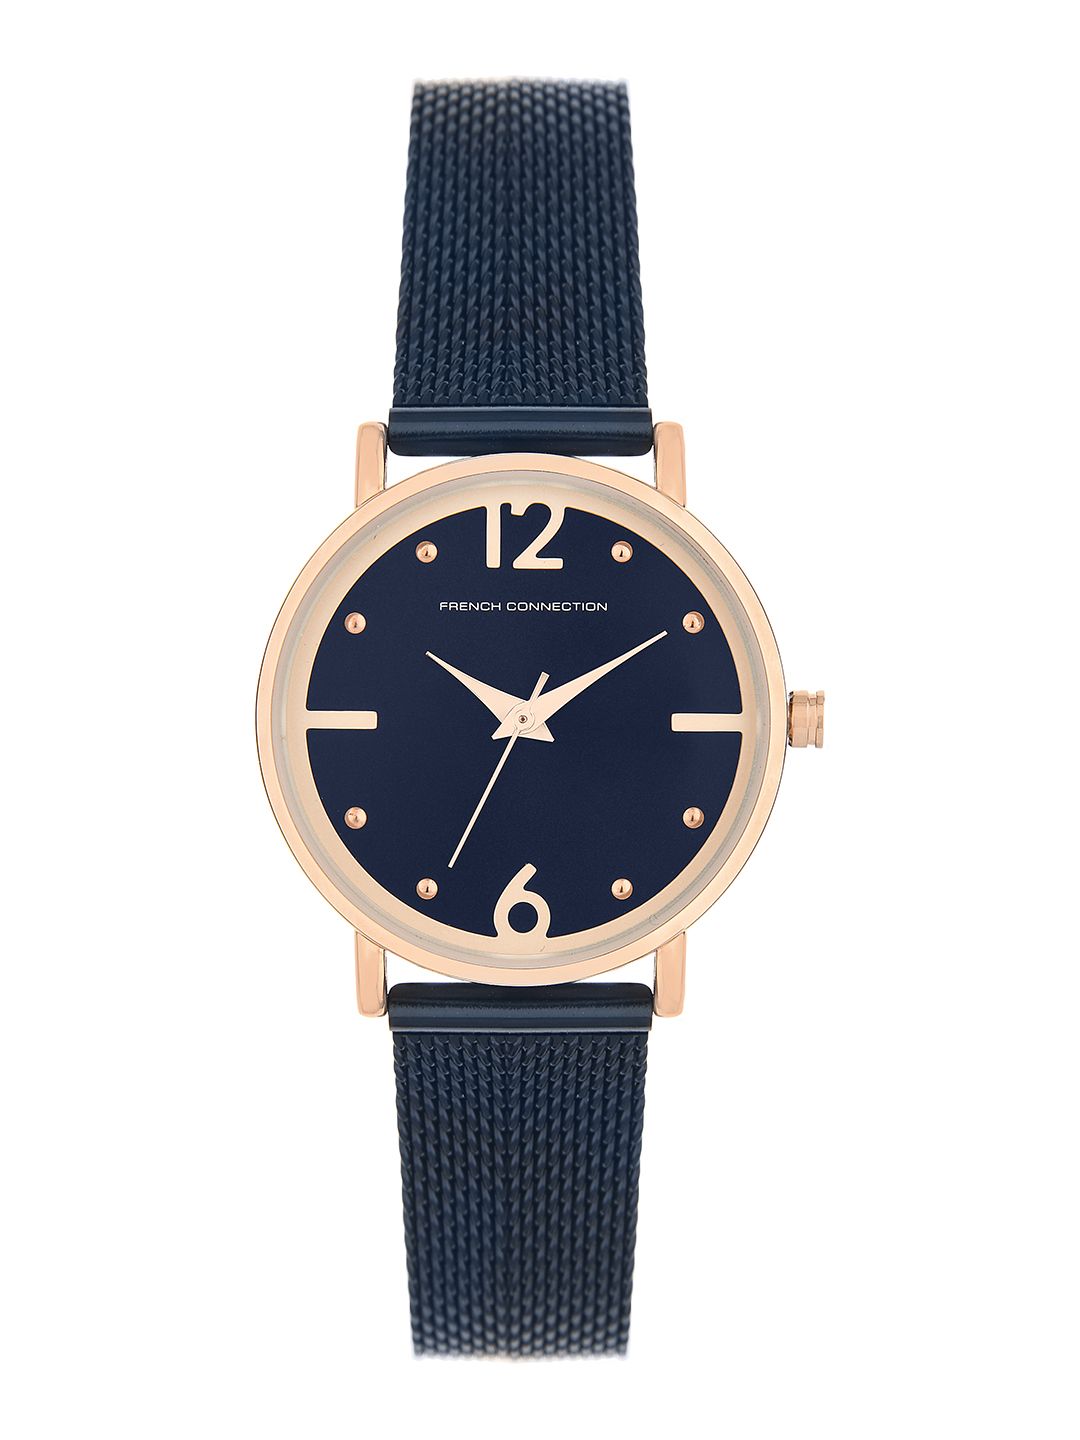 French Connection Women Navy Blue Analogue Watch FCN0006A Price in India